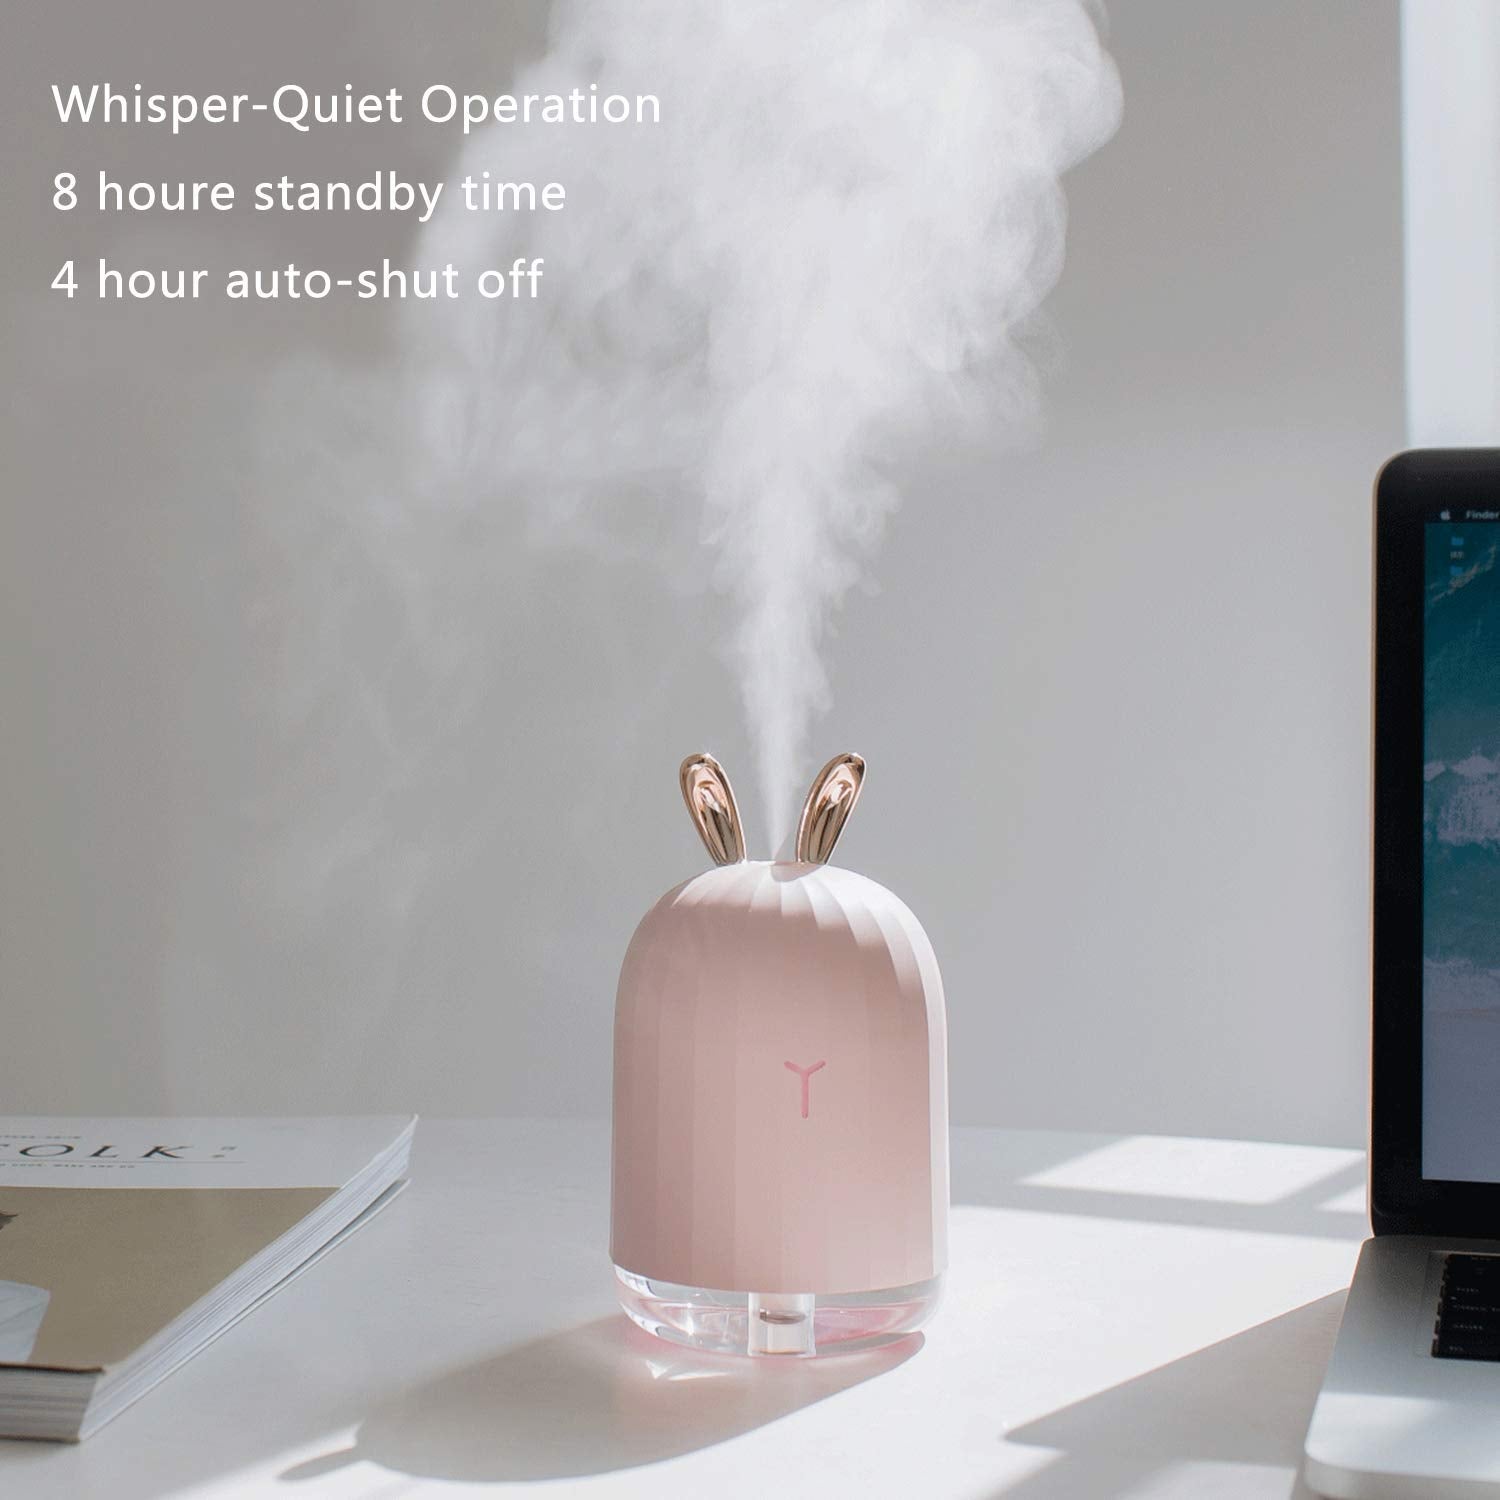 Best Mini Humidifiers 2020 For Desk, Office & Home